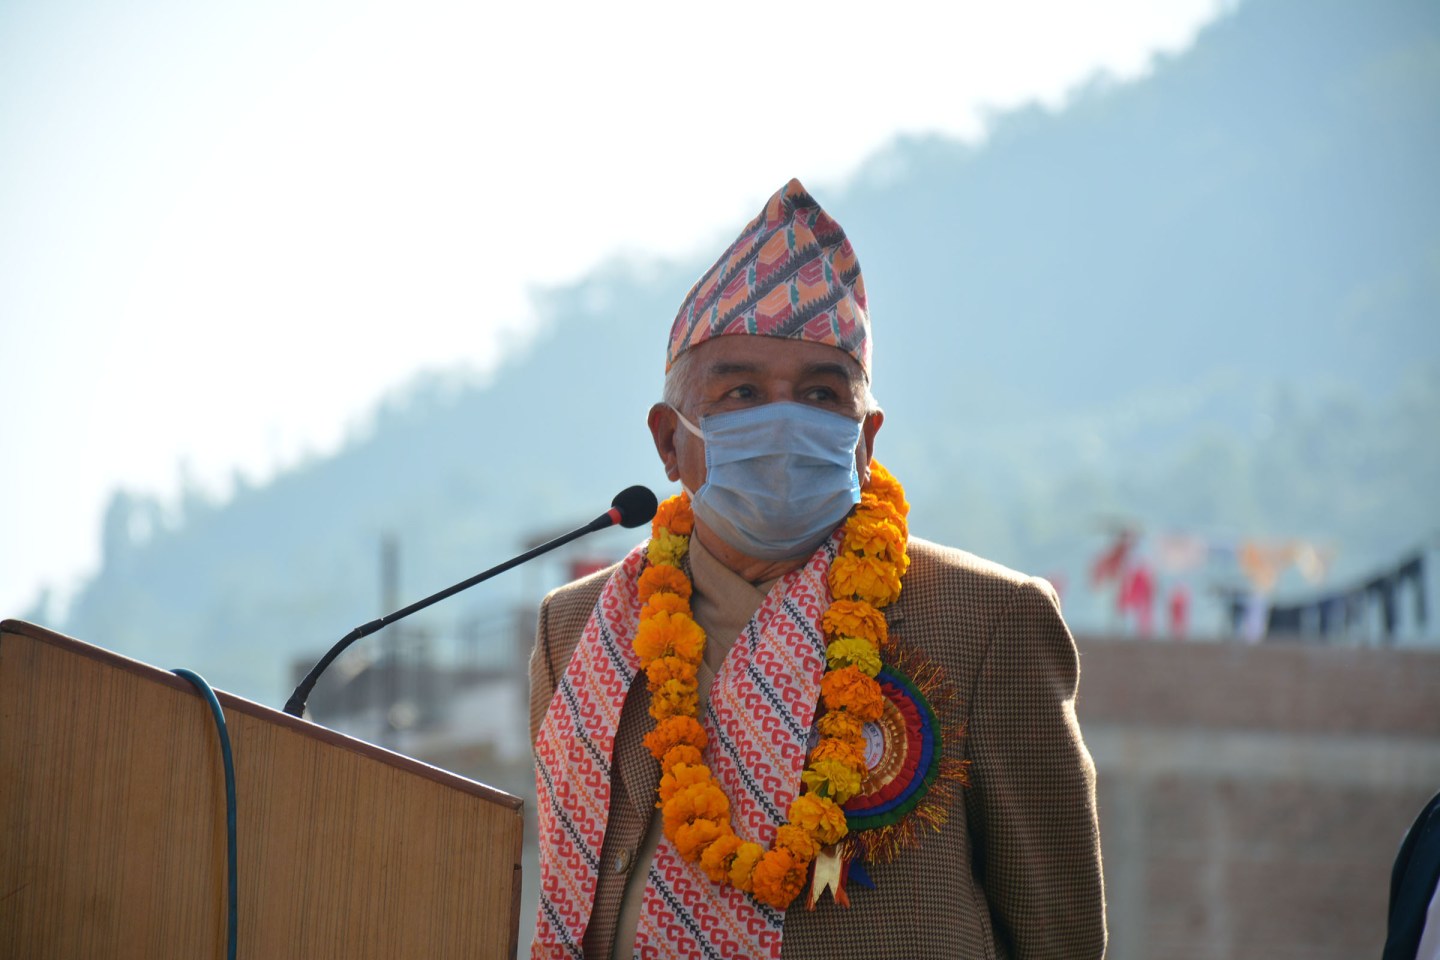 Mid-term election would spur corruption and poverty: NC senior leader Poudel